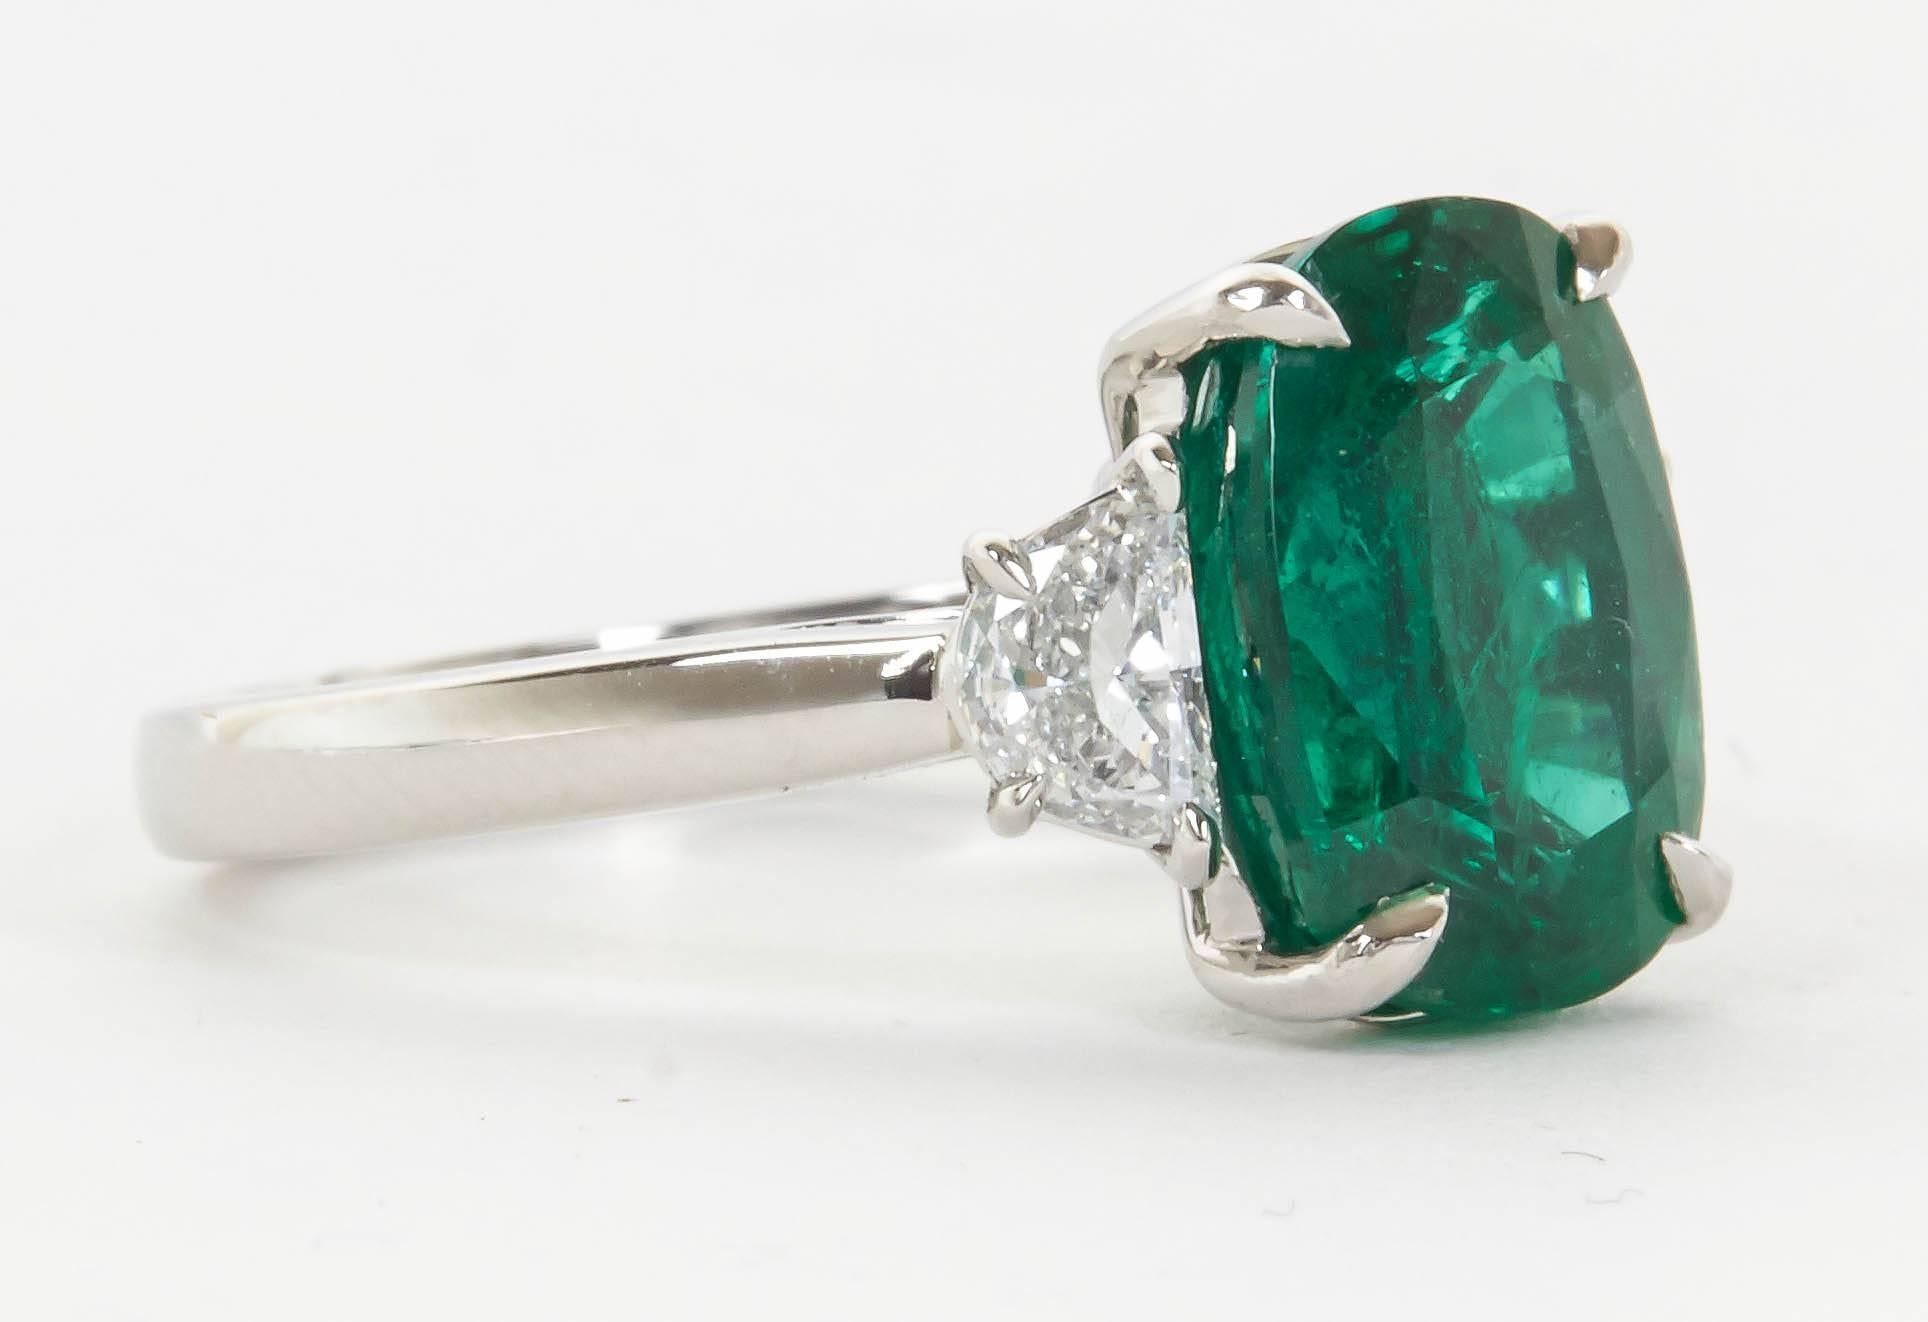 Pictures do not do this Emerald justice! 

A very fine green color and very brilliant, this 4.21 carat Emerald is certified by GIA and has minor oil treatment F1. 

The center stone is set with .54 carats of diamonds in platinum.

A fabulous